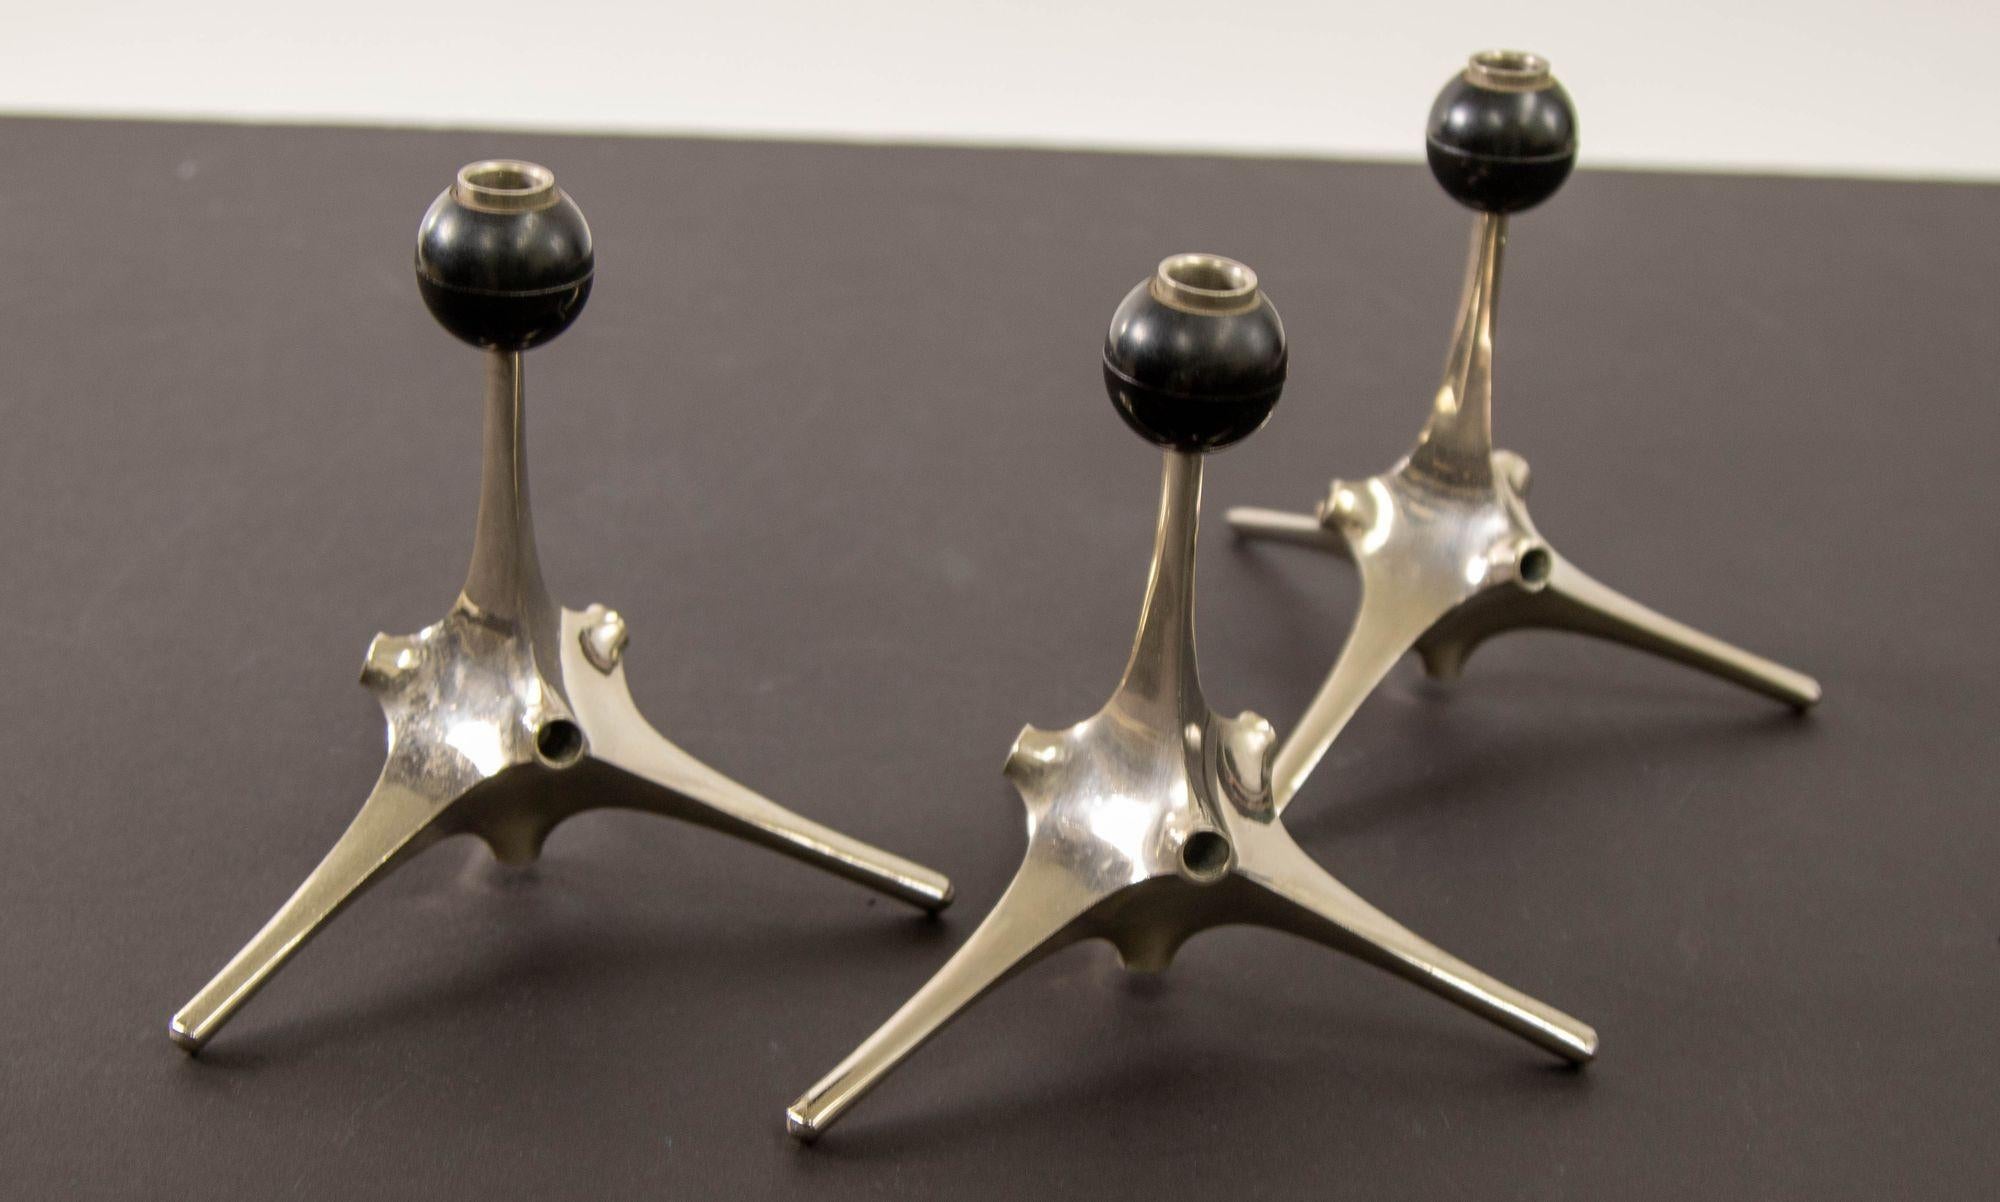 Hand-Crafted 1960s Nagel Candle Holder, West Germany by Fritz Nagel and Caesar Stoffi For Sale